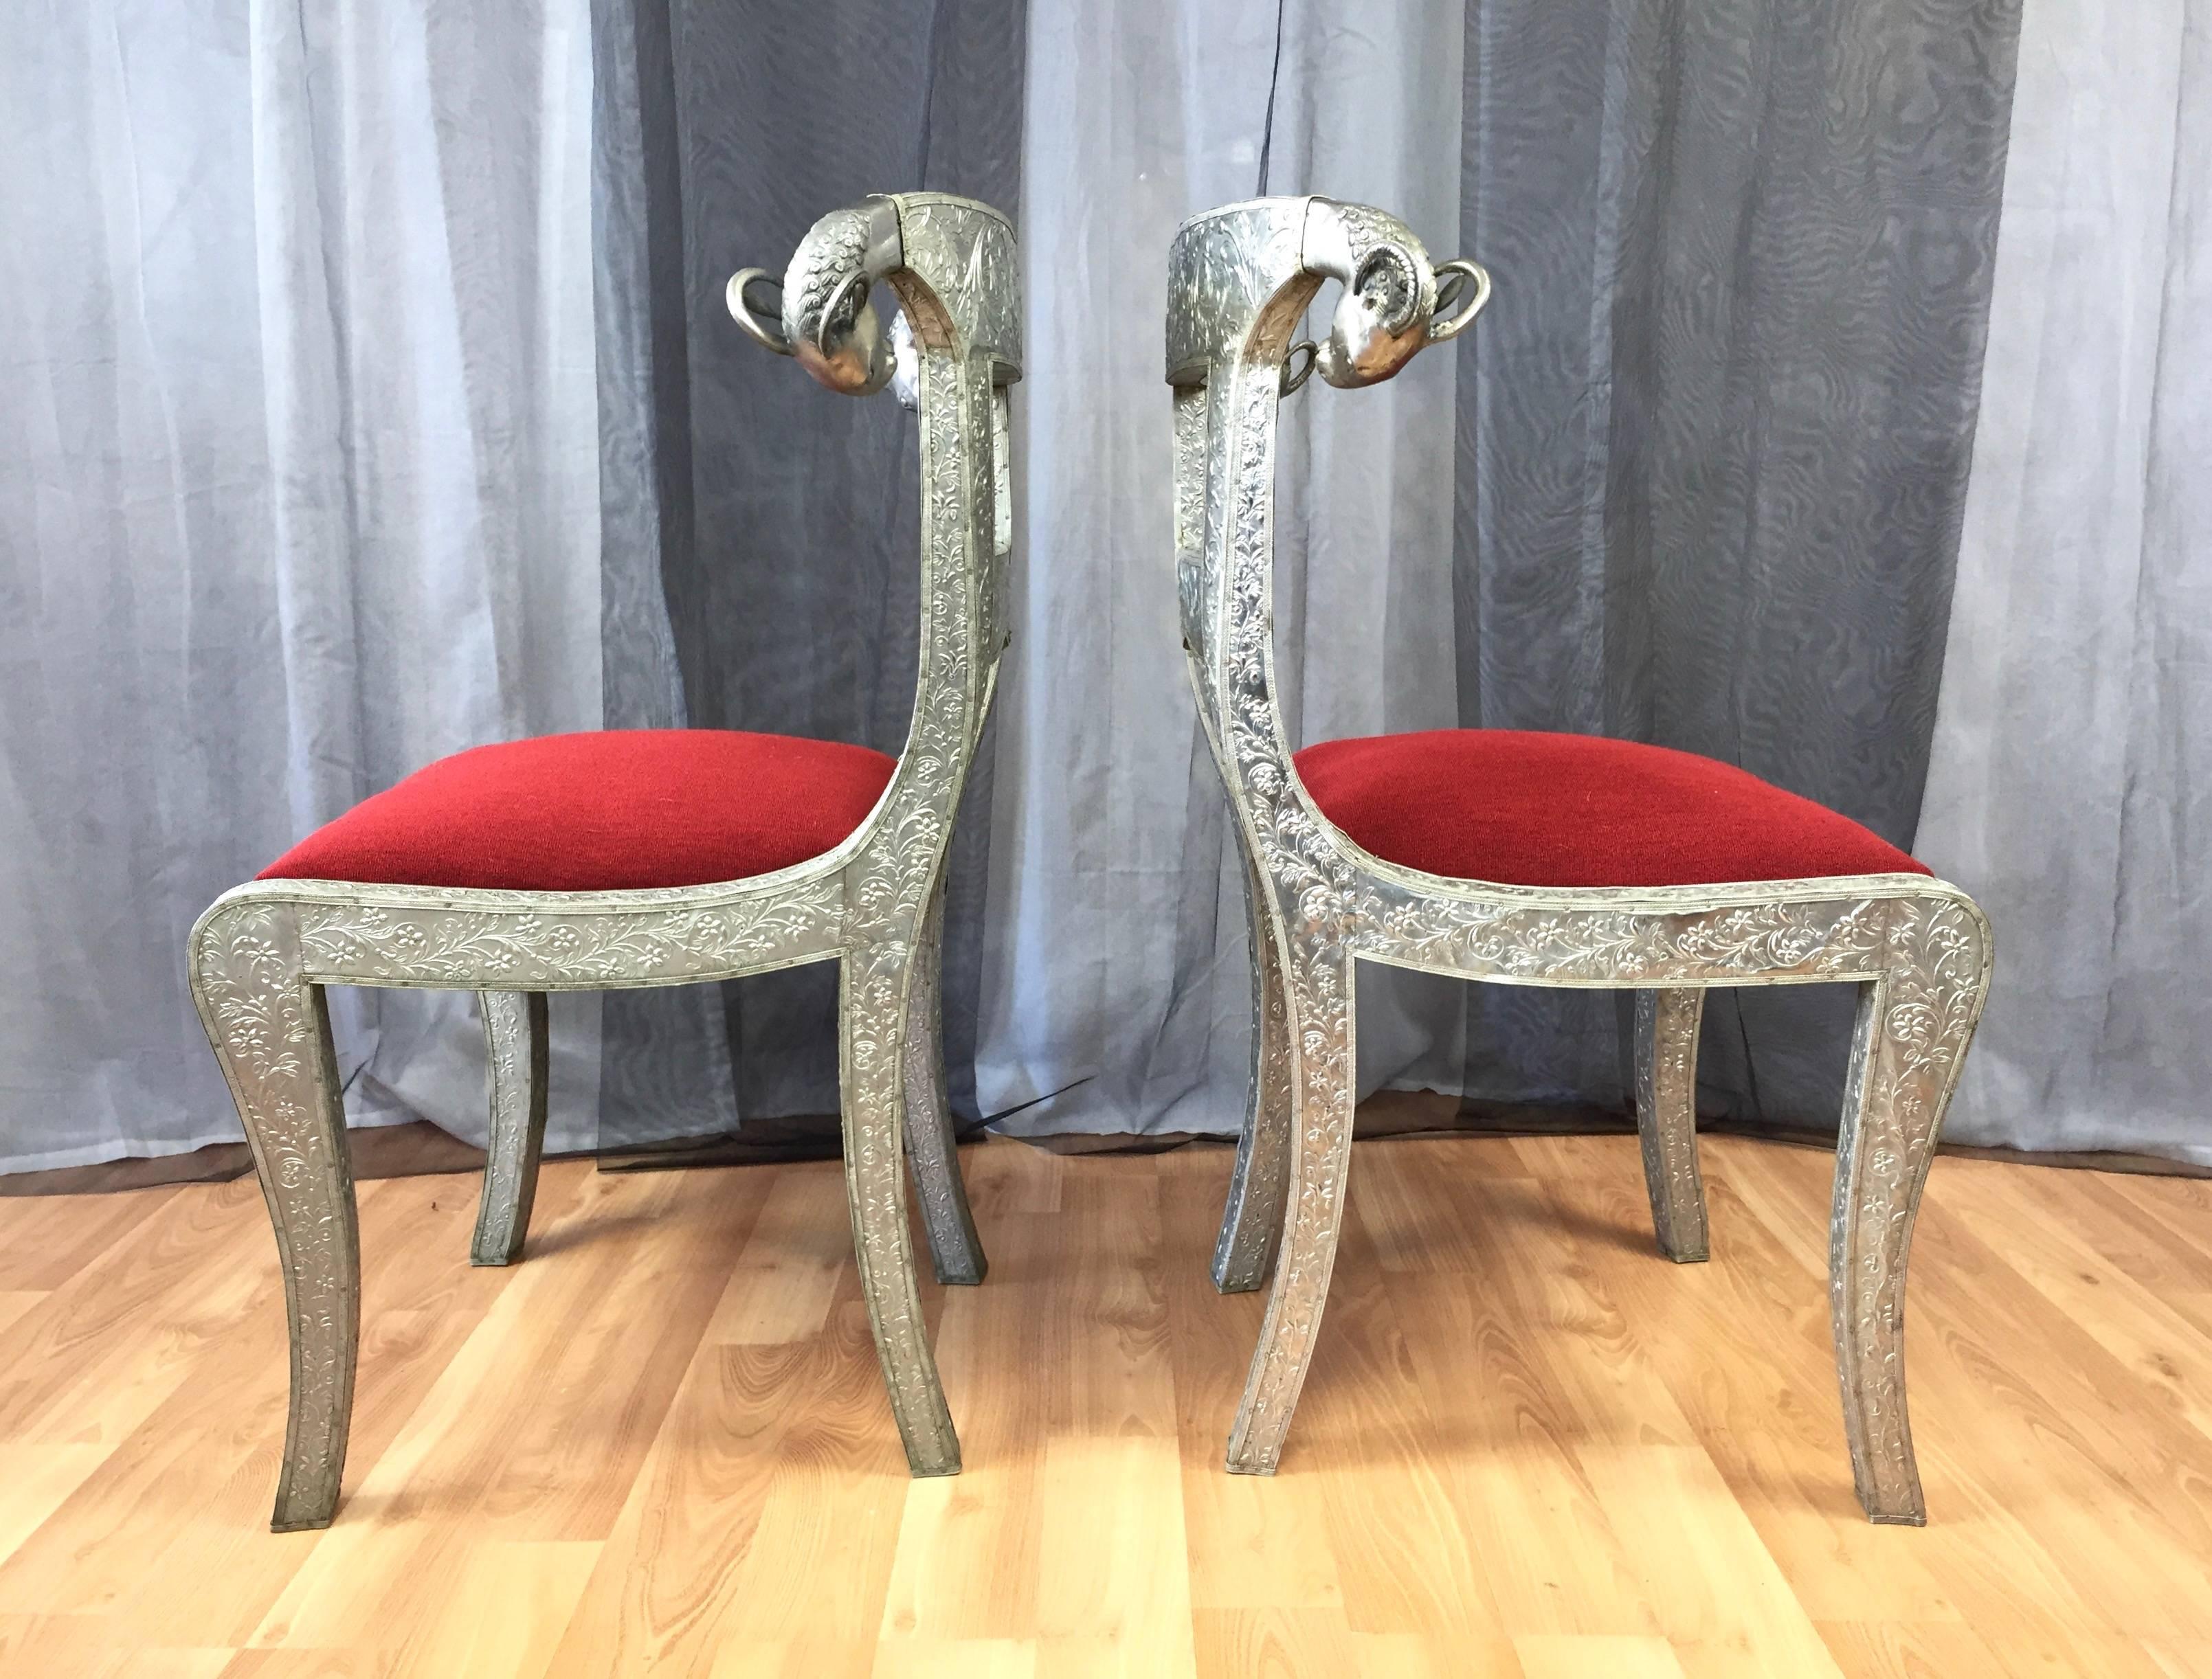 An enchanting pair of antique Anglo-Indian or Anglo-Raj metal-clad wedding dowry chairs with ram’s head finials.

Wood frame completely covered in incredibly intricate handcrafted and gleaming tin repoussé. Features a floral and love bird motif